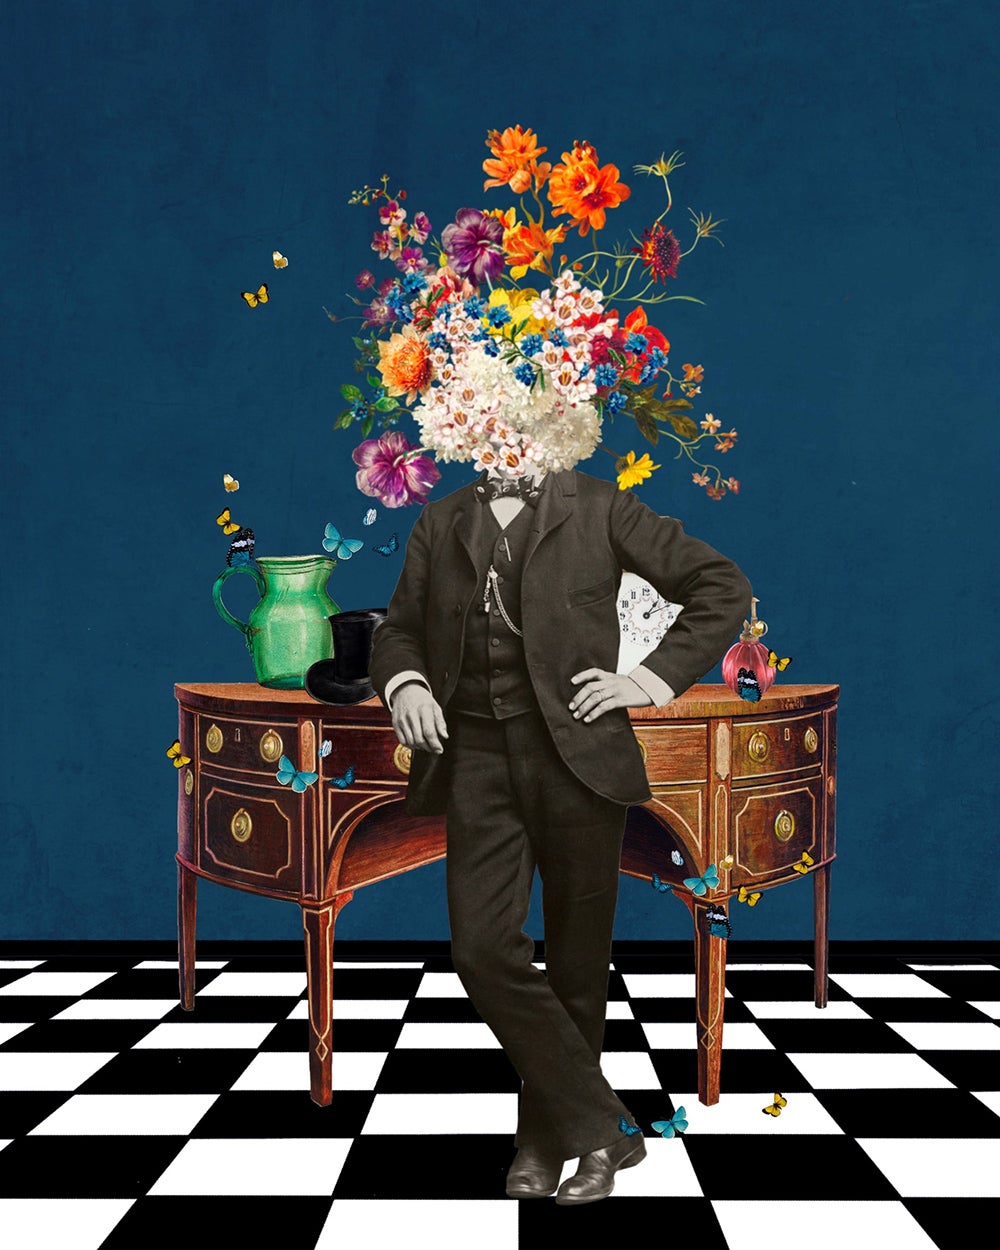 A photo illustration showing a man's head exploding with flowers.